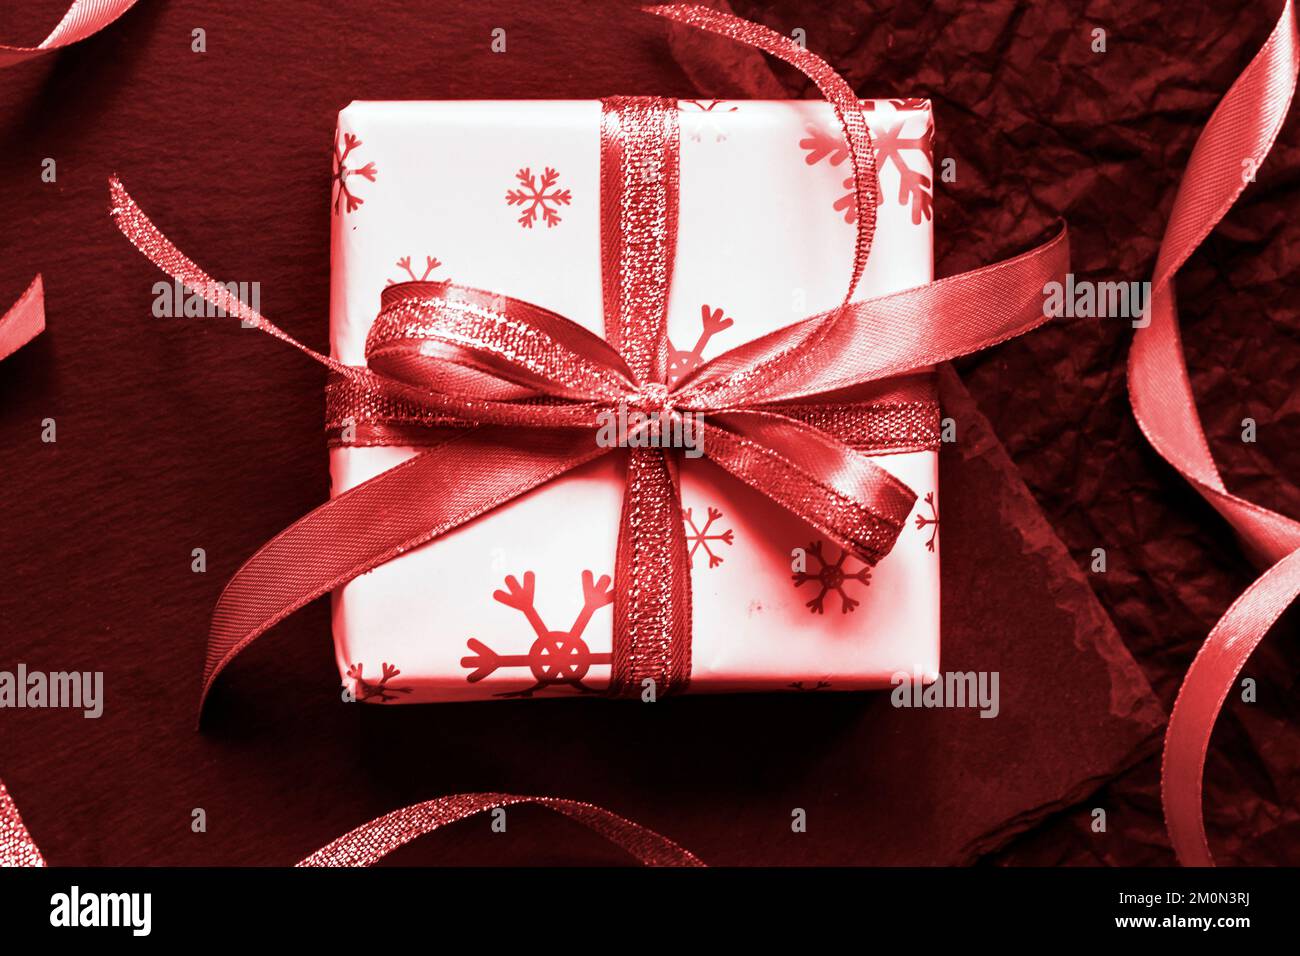 Christmas gift box wrapped in a white paper with snowflakes and tied with a ribbon. Red toned. Flat lay, top view Stock Photo